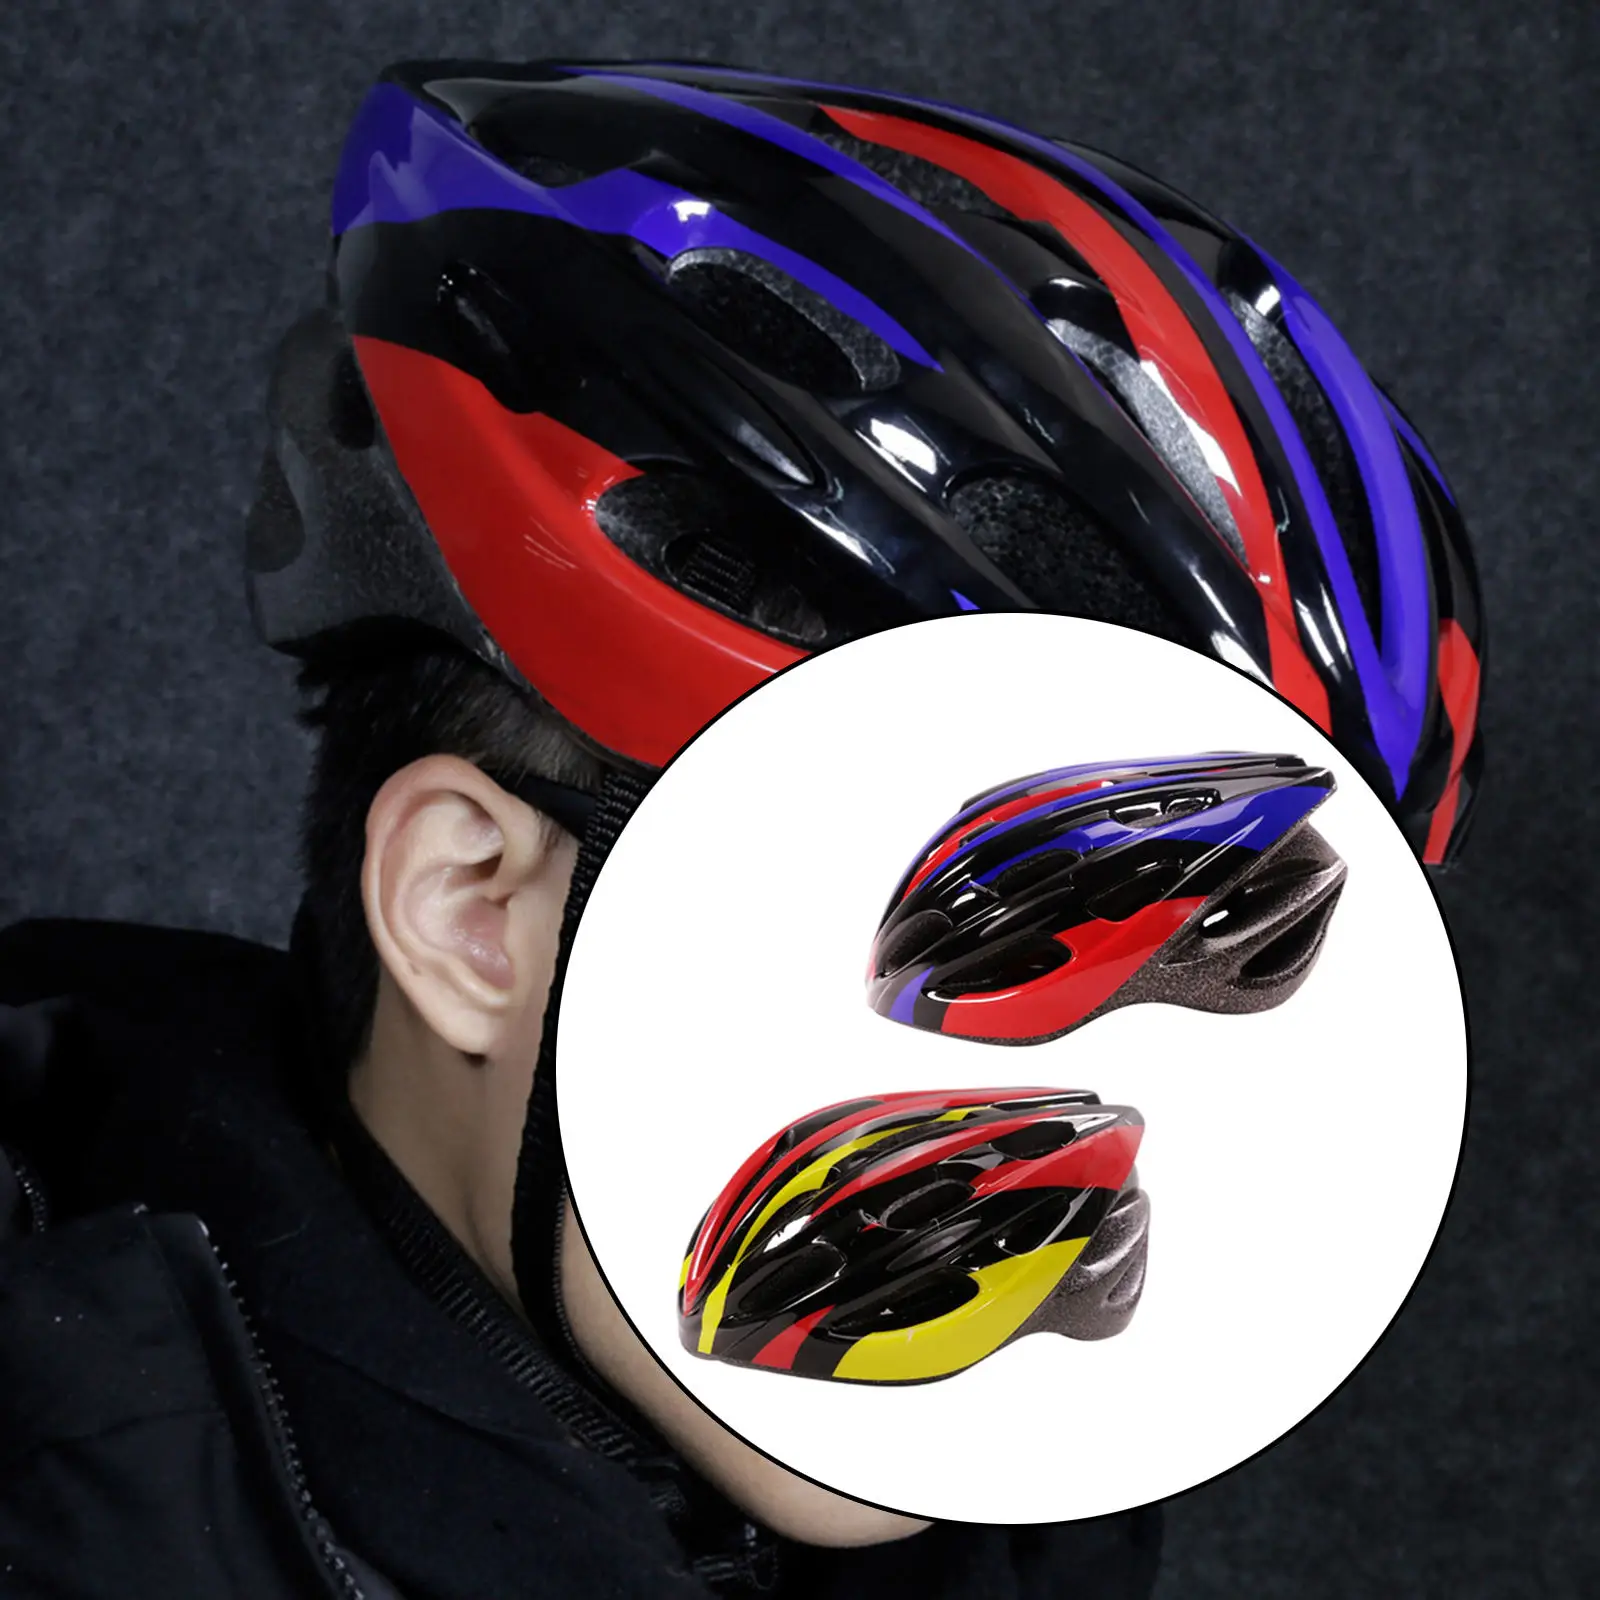 Adults Bicycle Helmet, Men Women Mountain Road Bike Safety Helmet Breathable Vents Cycling Crash Hat Hard Caps